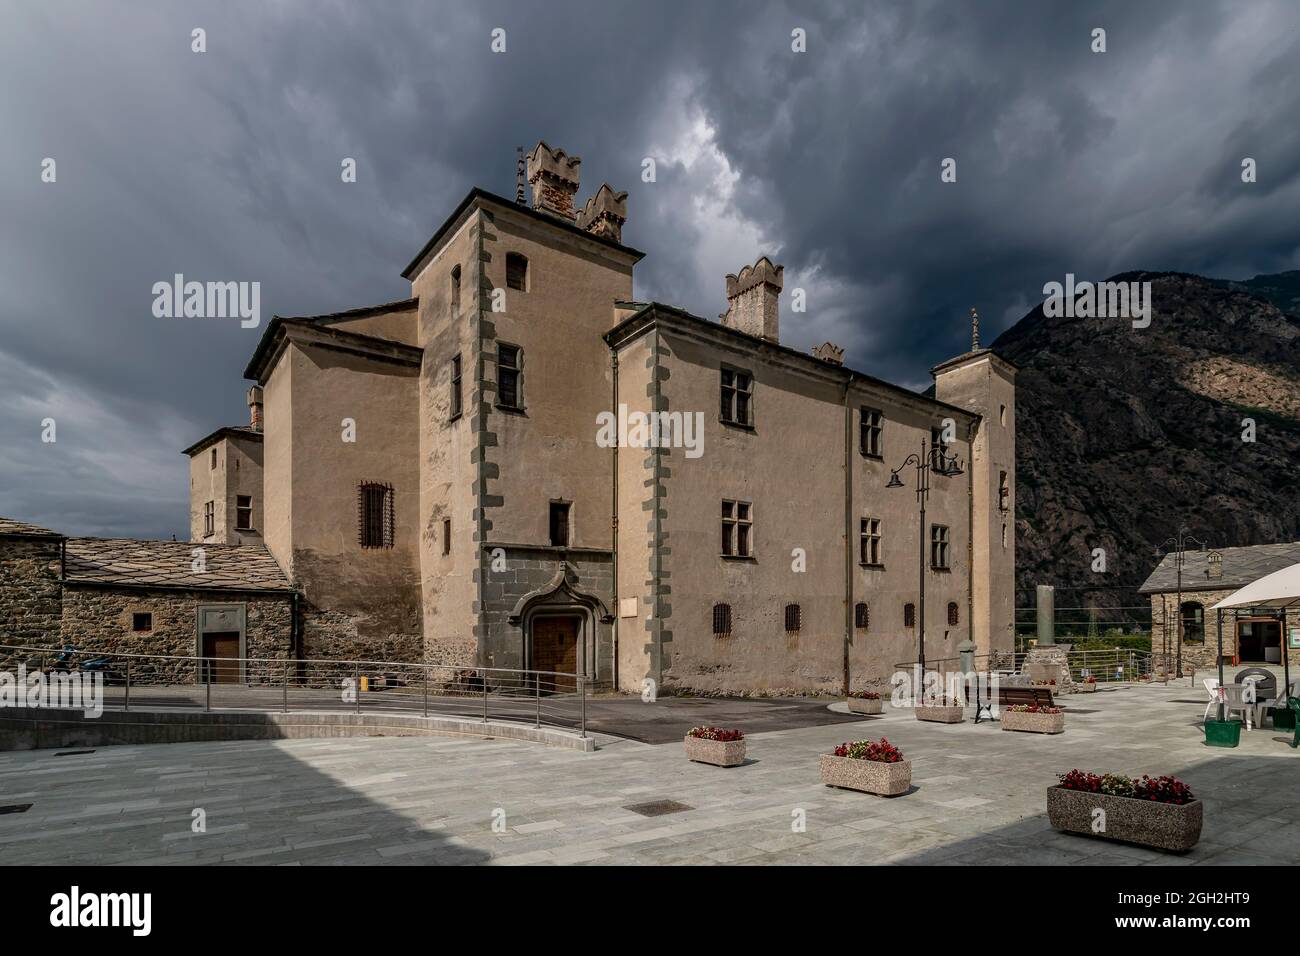 The ancient castle of Issogne, Aosta Valley, Italy, under a dramatic sky Stock Photo